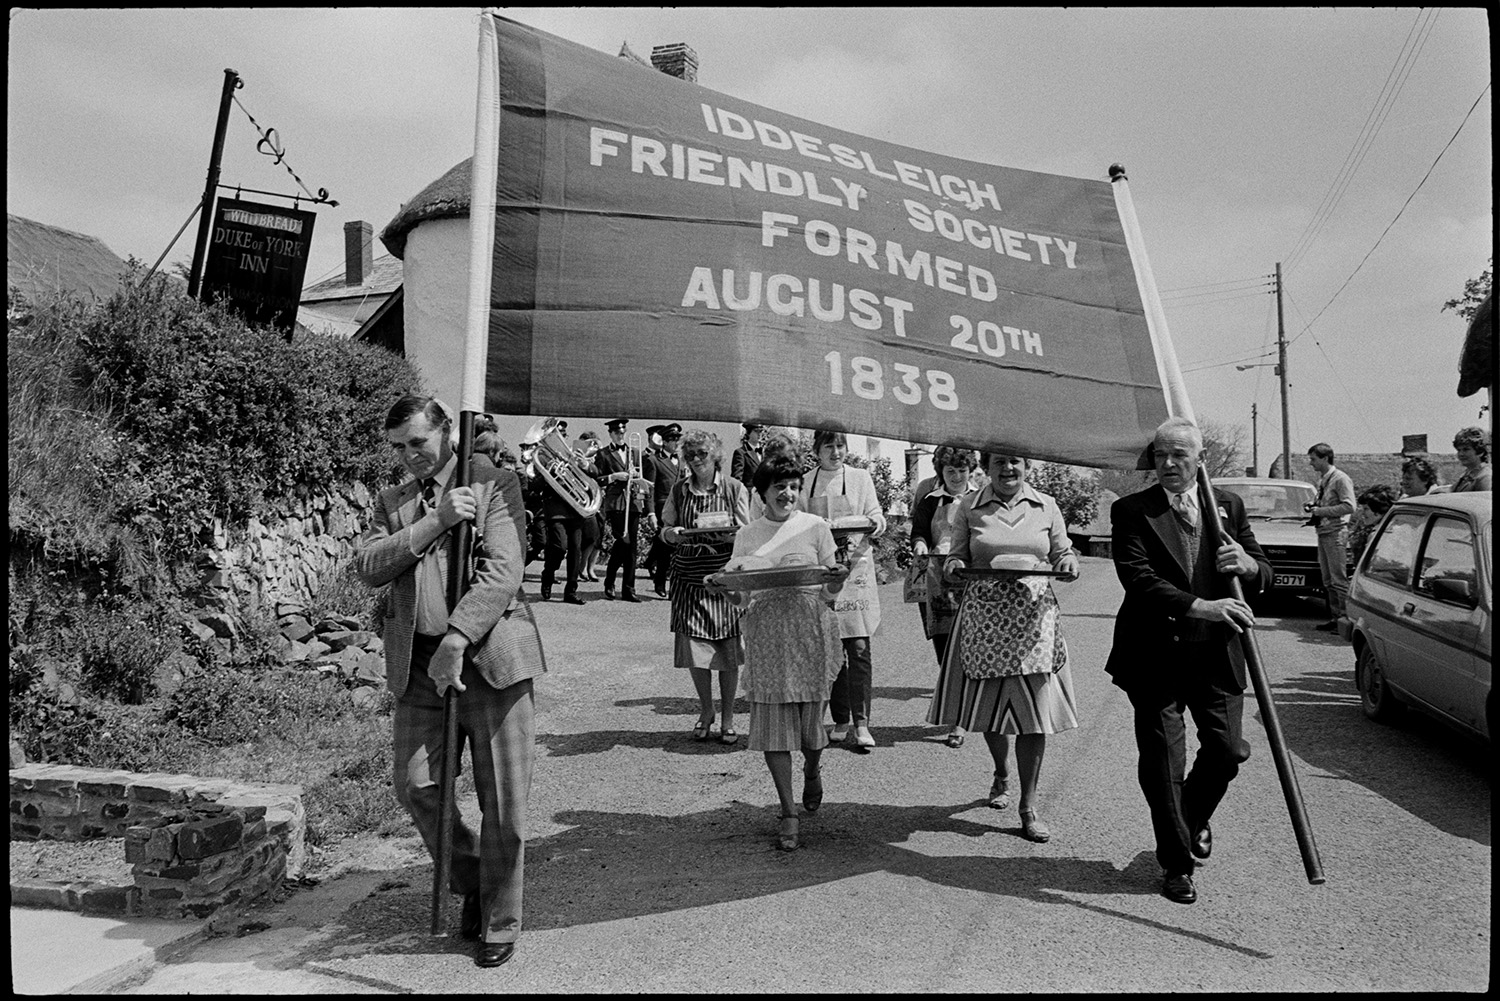 Club Day, women and club members parading down to village hall with mashed potatoes.
[Women wearing aprons and carrying trays with bowls of mashed potato along a street in the Iddesleigh Club Day parade. They are walking behind the Iddesleigh Friendly Society banner with the Hatherleigh Silver Band following them.]